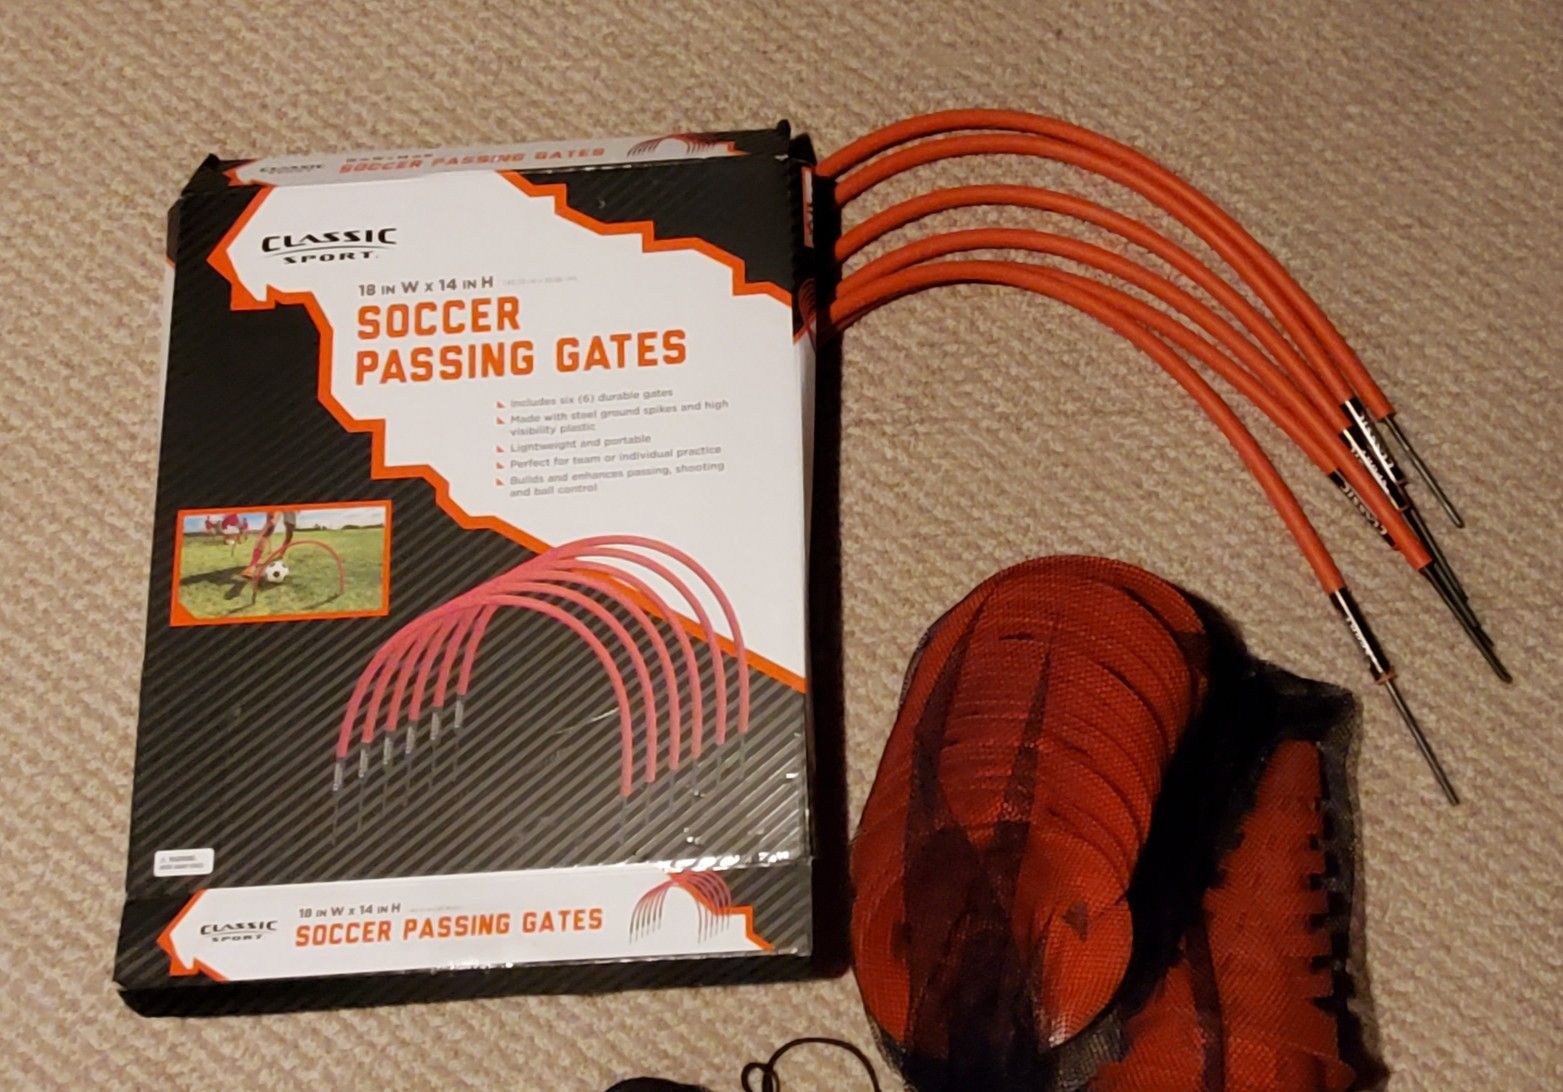 Soccer passing gates and field cones